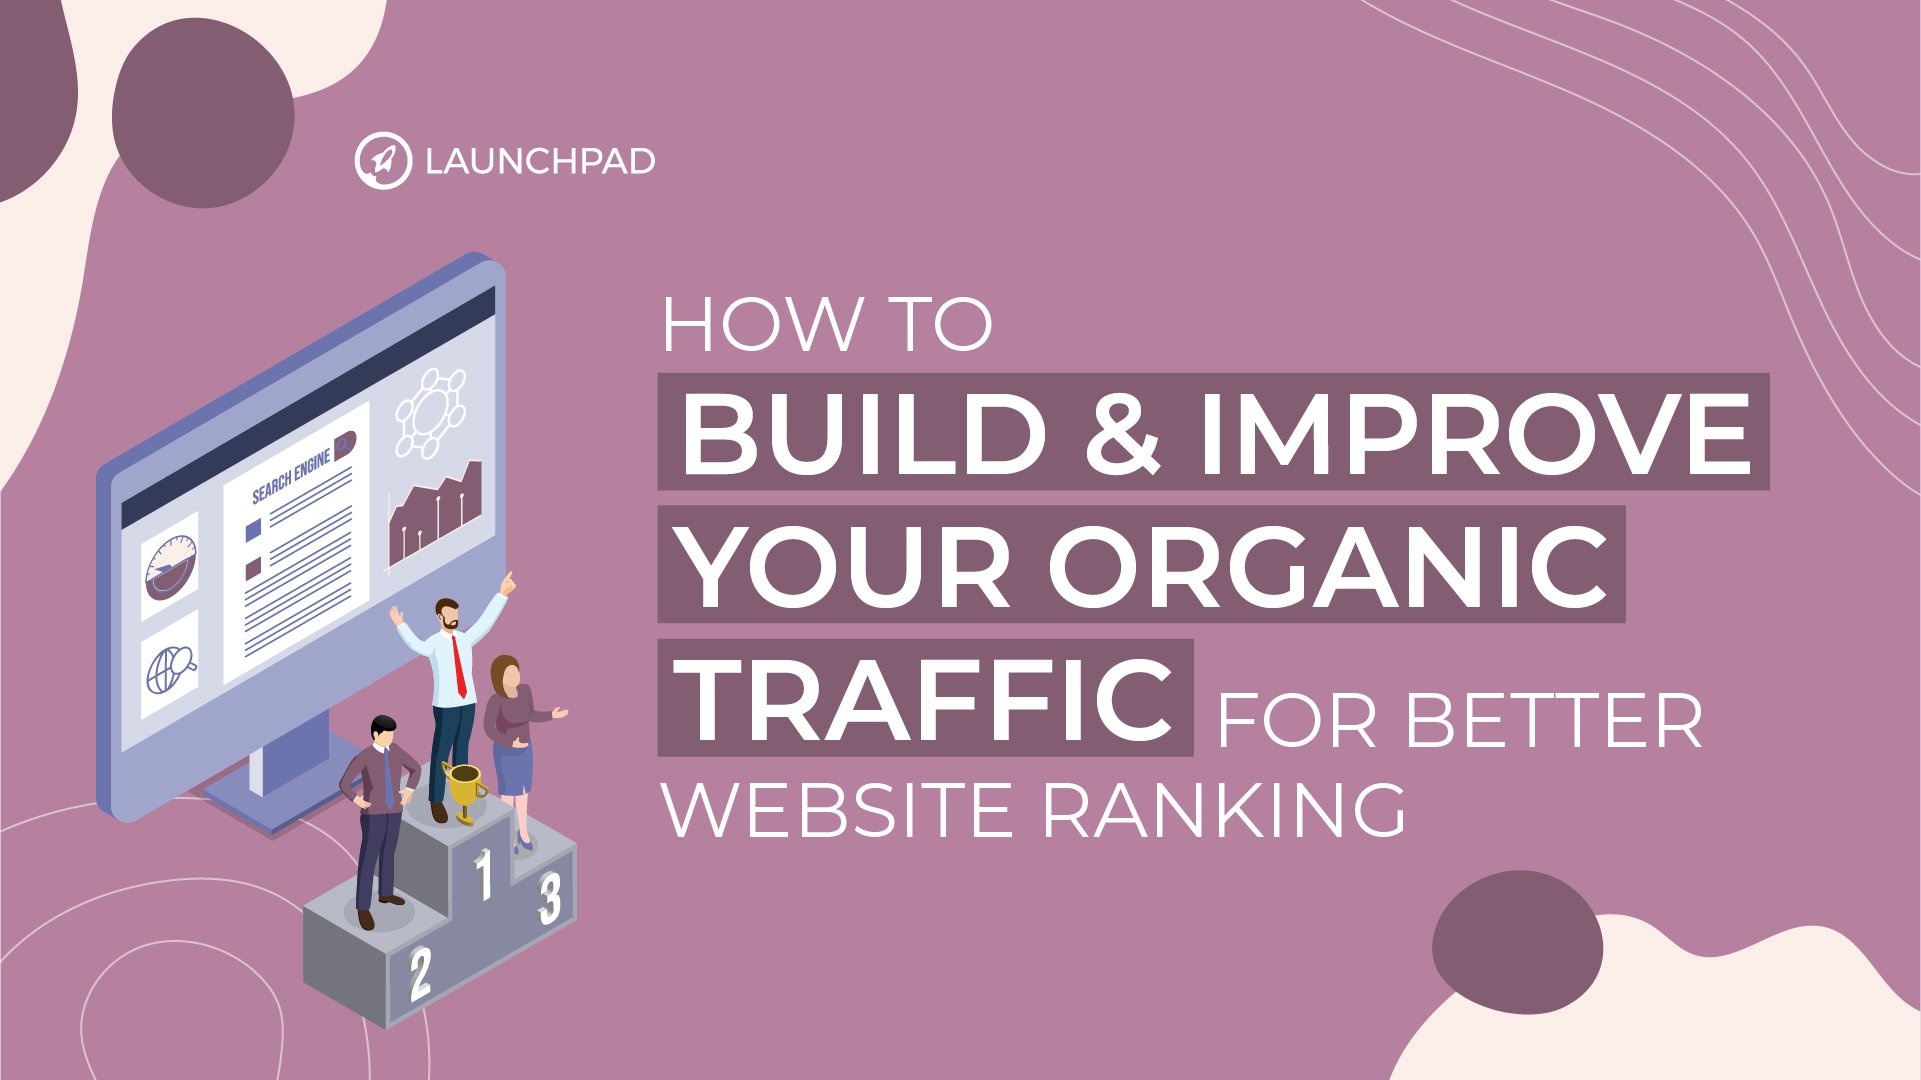 How to Build & Improve Your Organic Traffic for Better Website Ranking - Launchpad